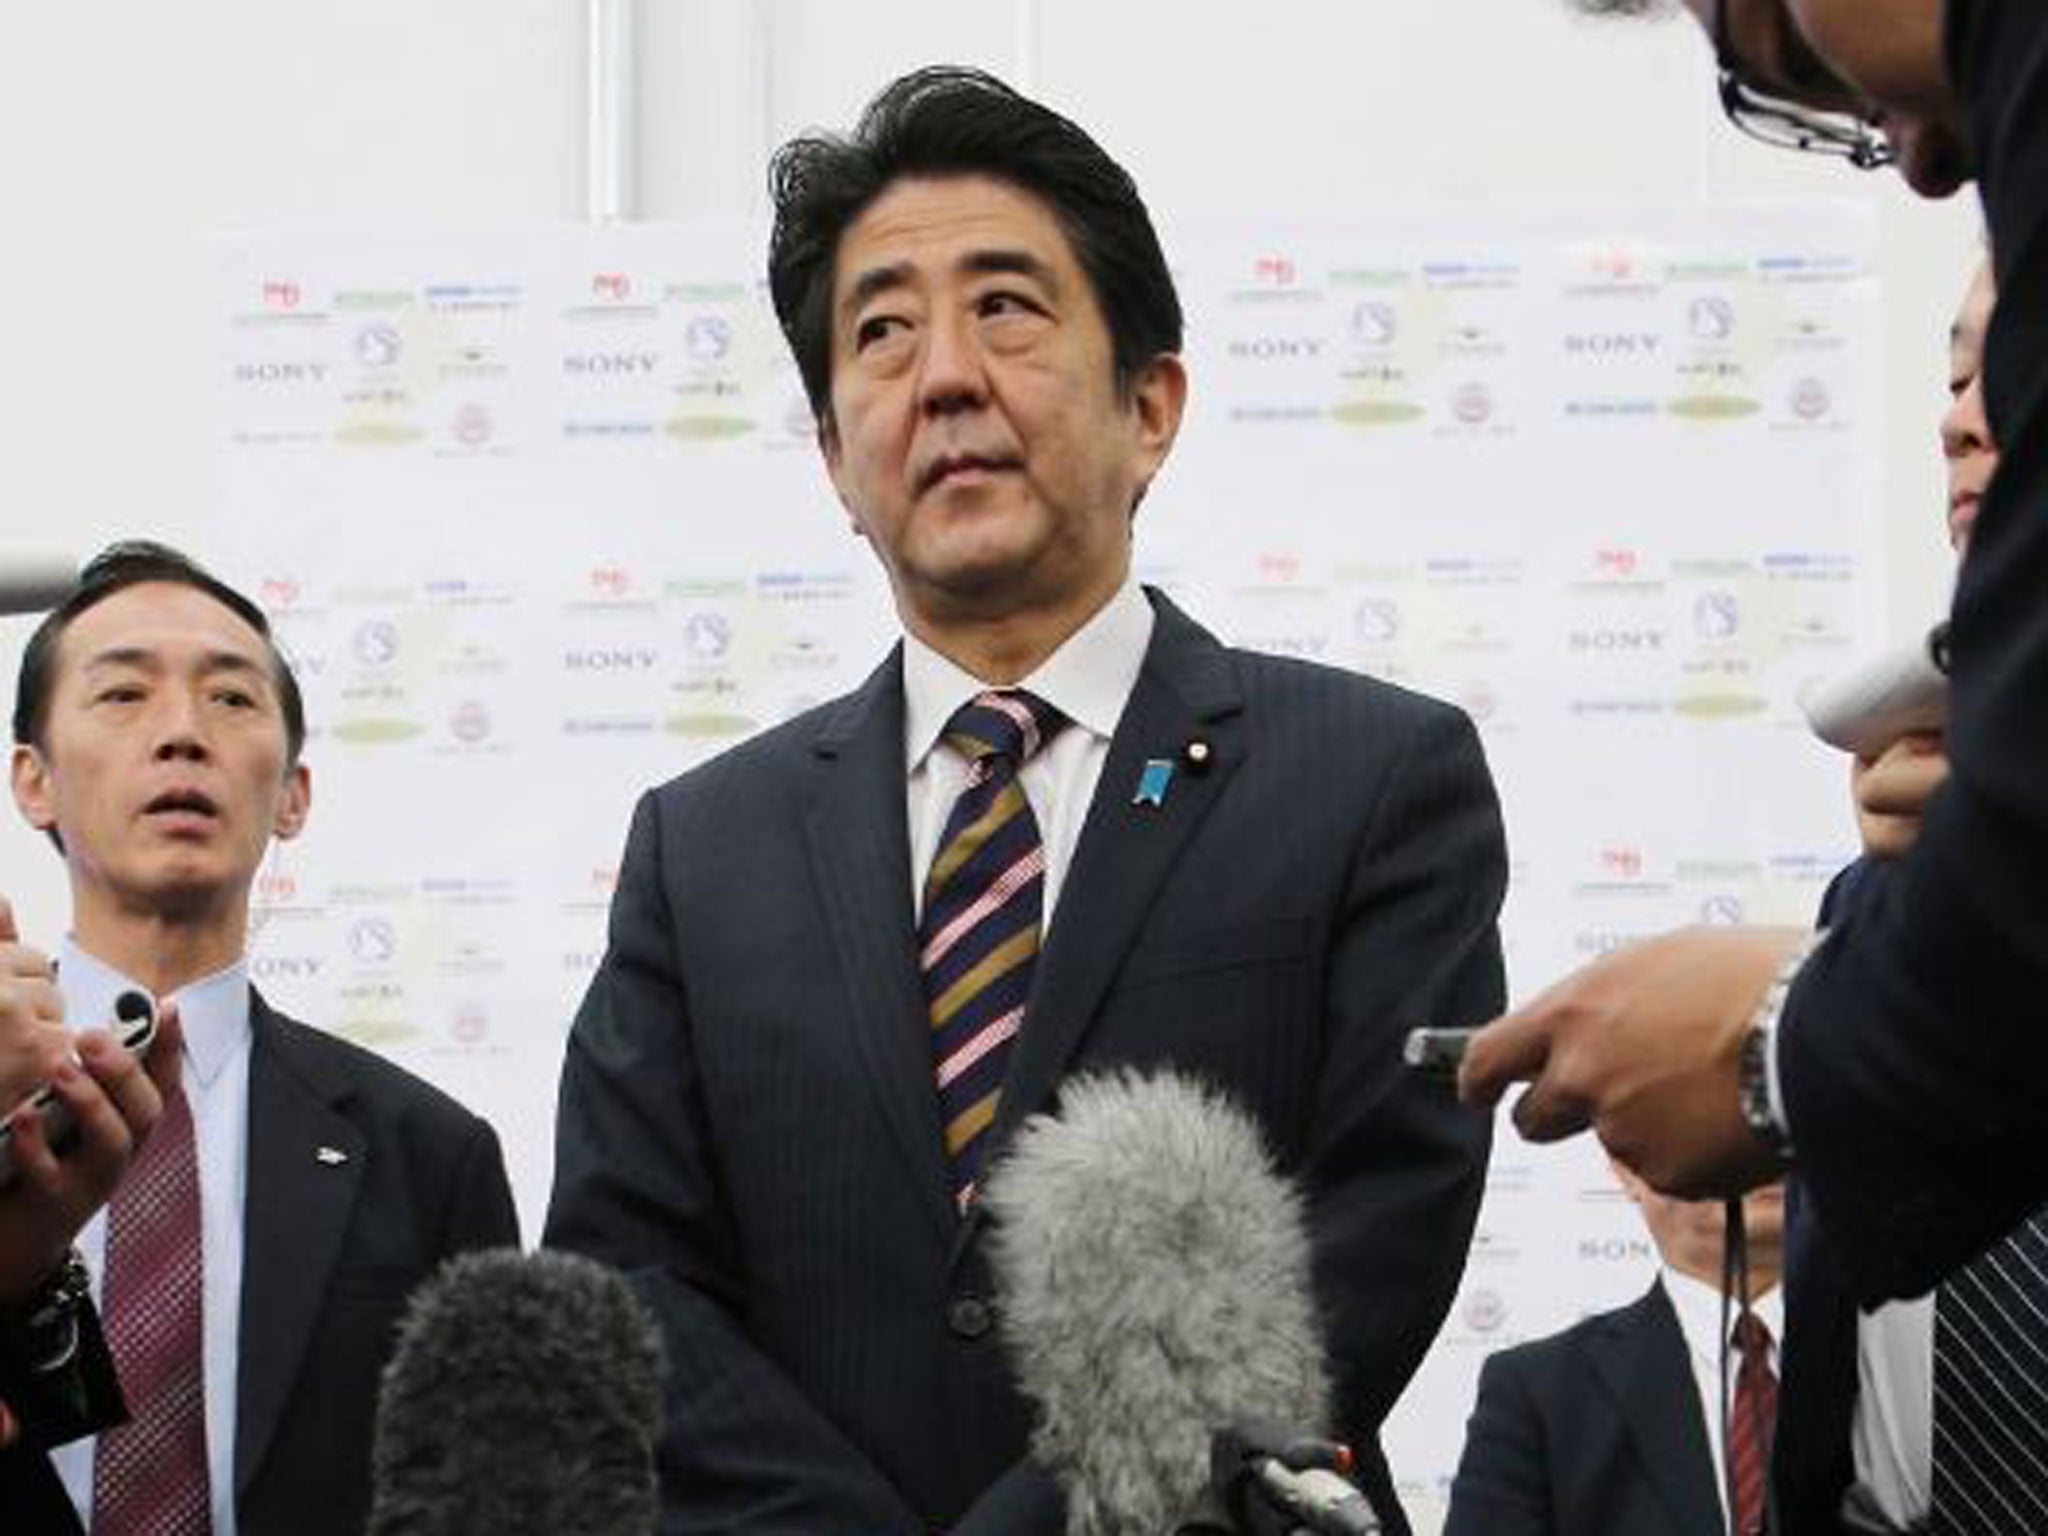 Japan’s Prime Minister Shinzo Abe is pushing through economic policies that have been coined Abenomics